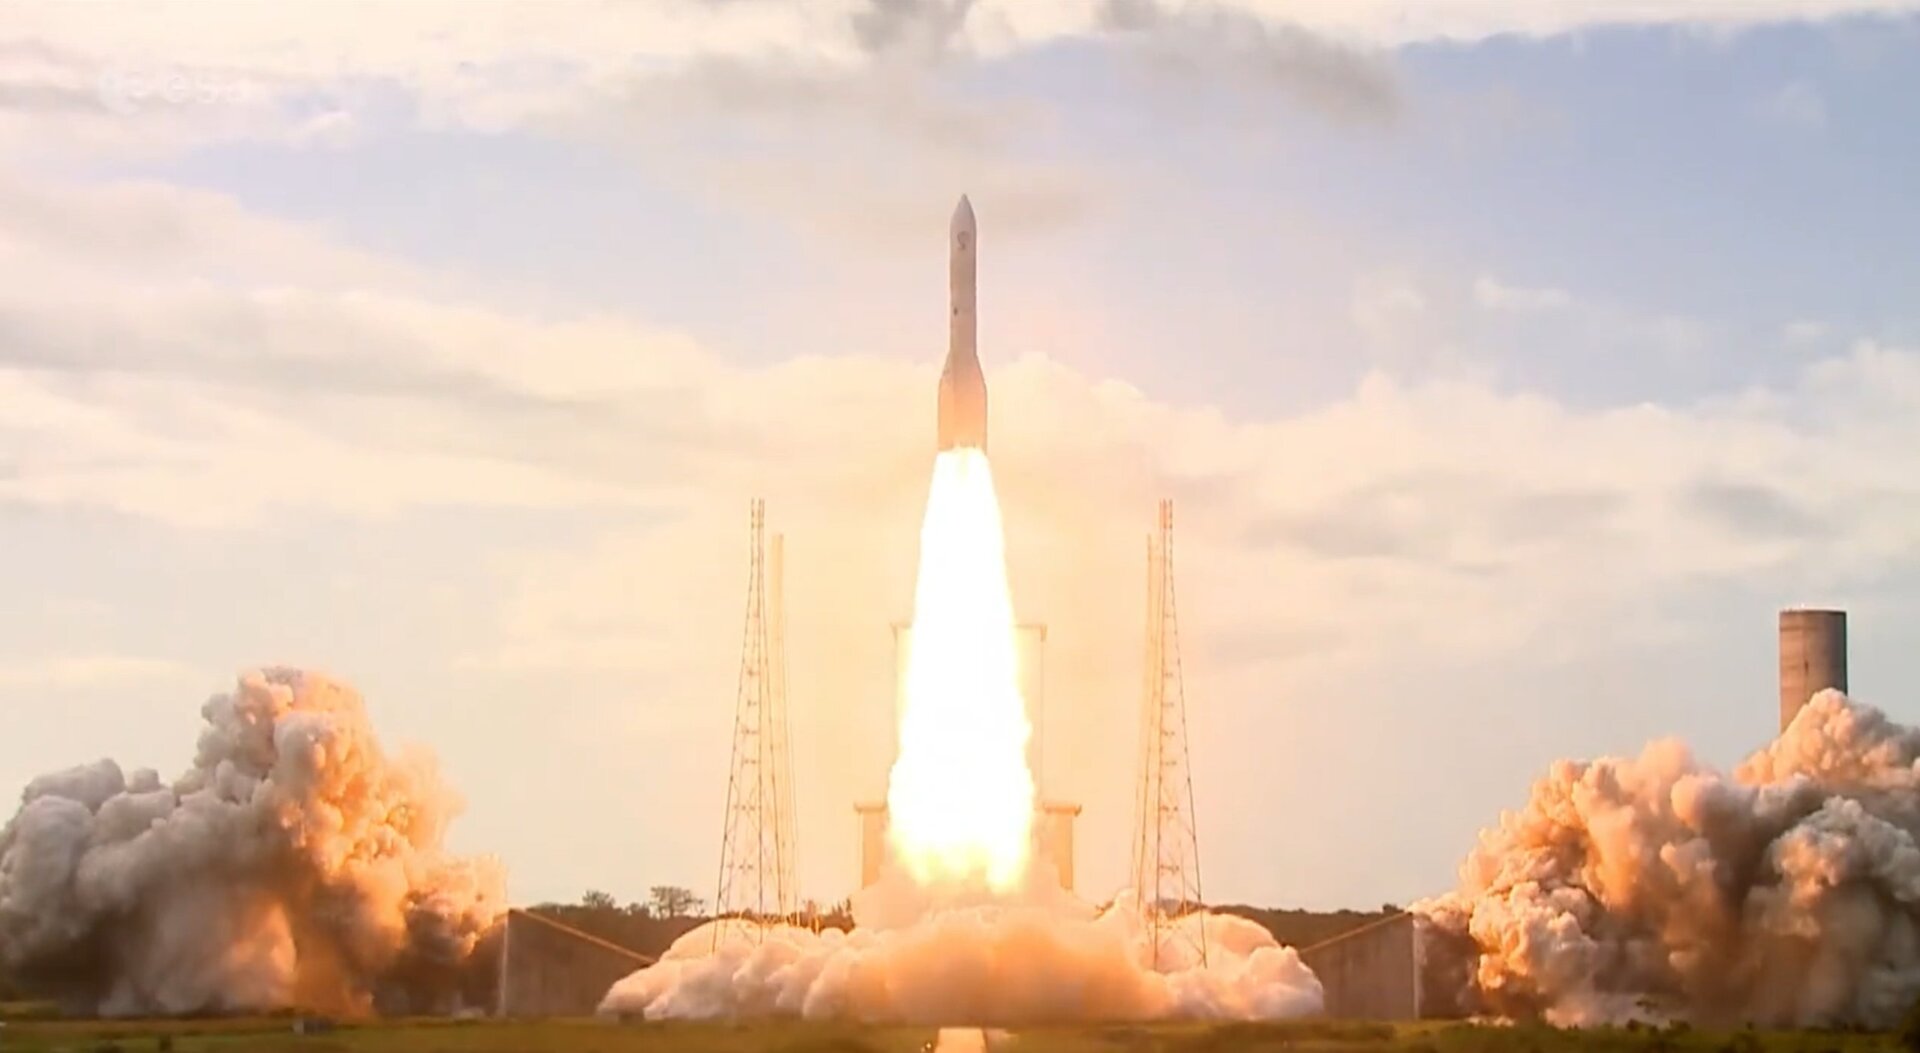 Ariane 6 lifting off for its inaugural flight.